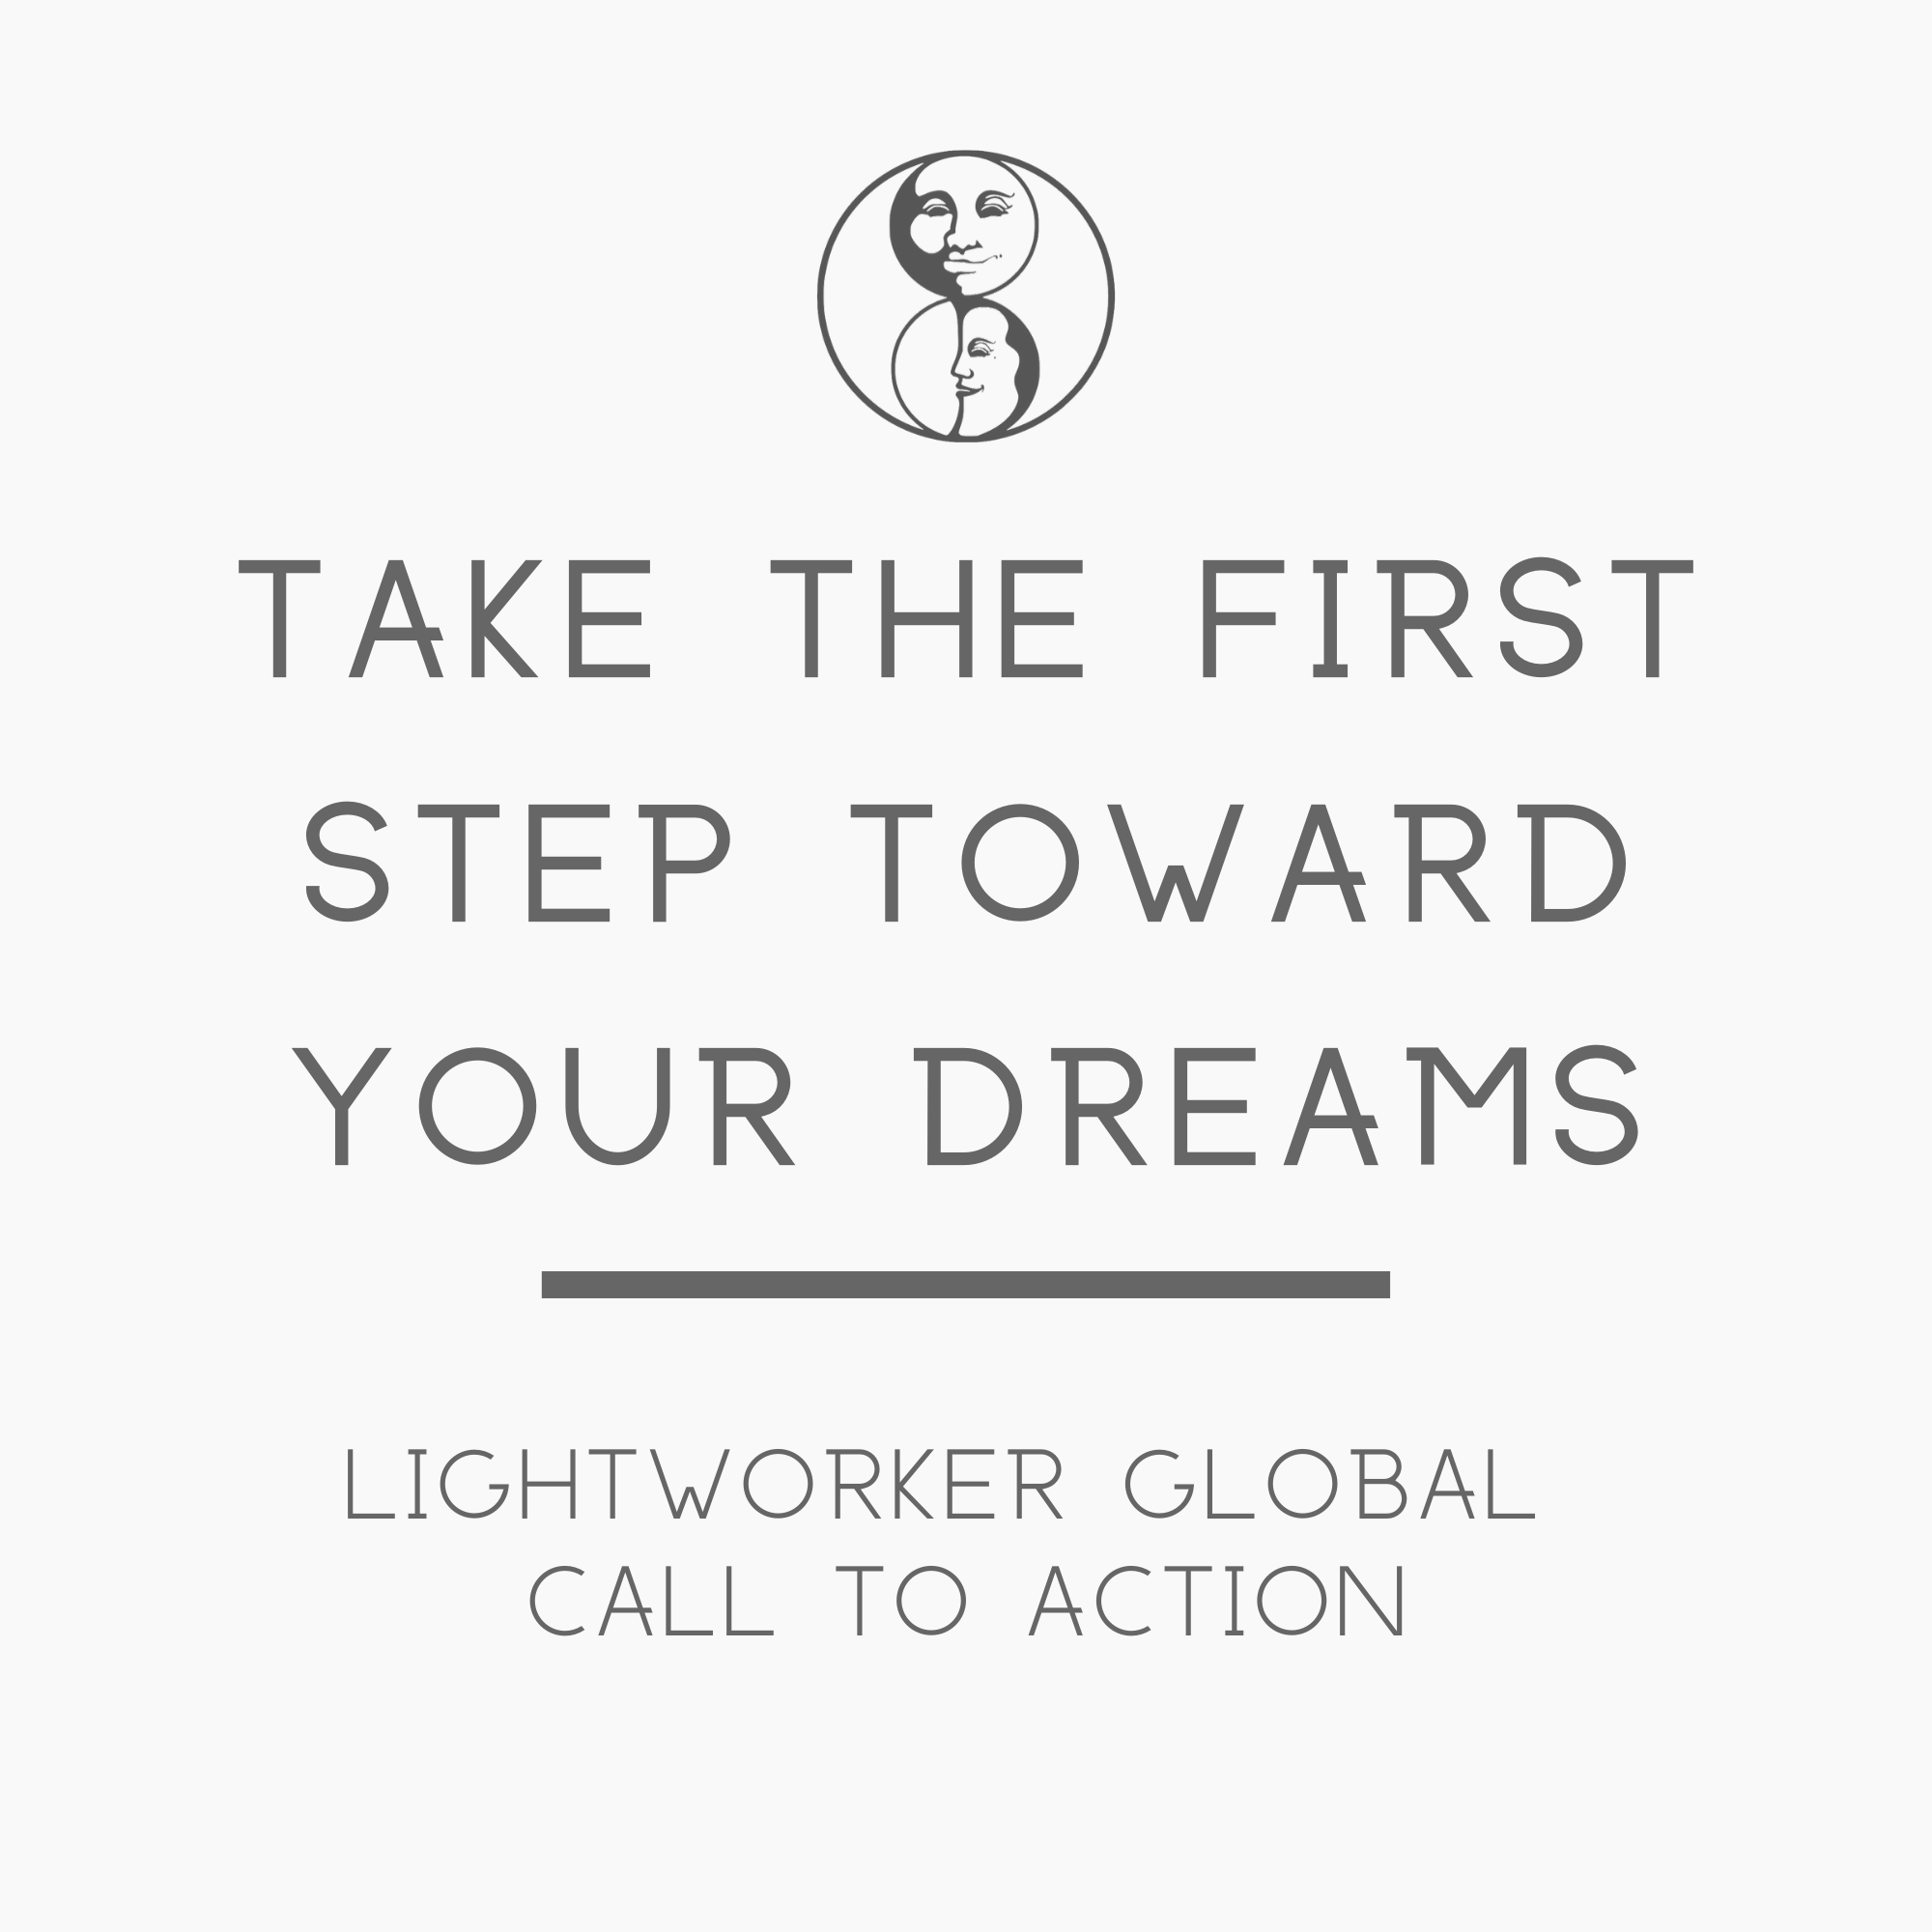 Take the First Step Toward Your Dreams - Lightworker Global Call to Action - LunaHolistic.com